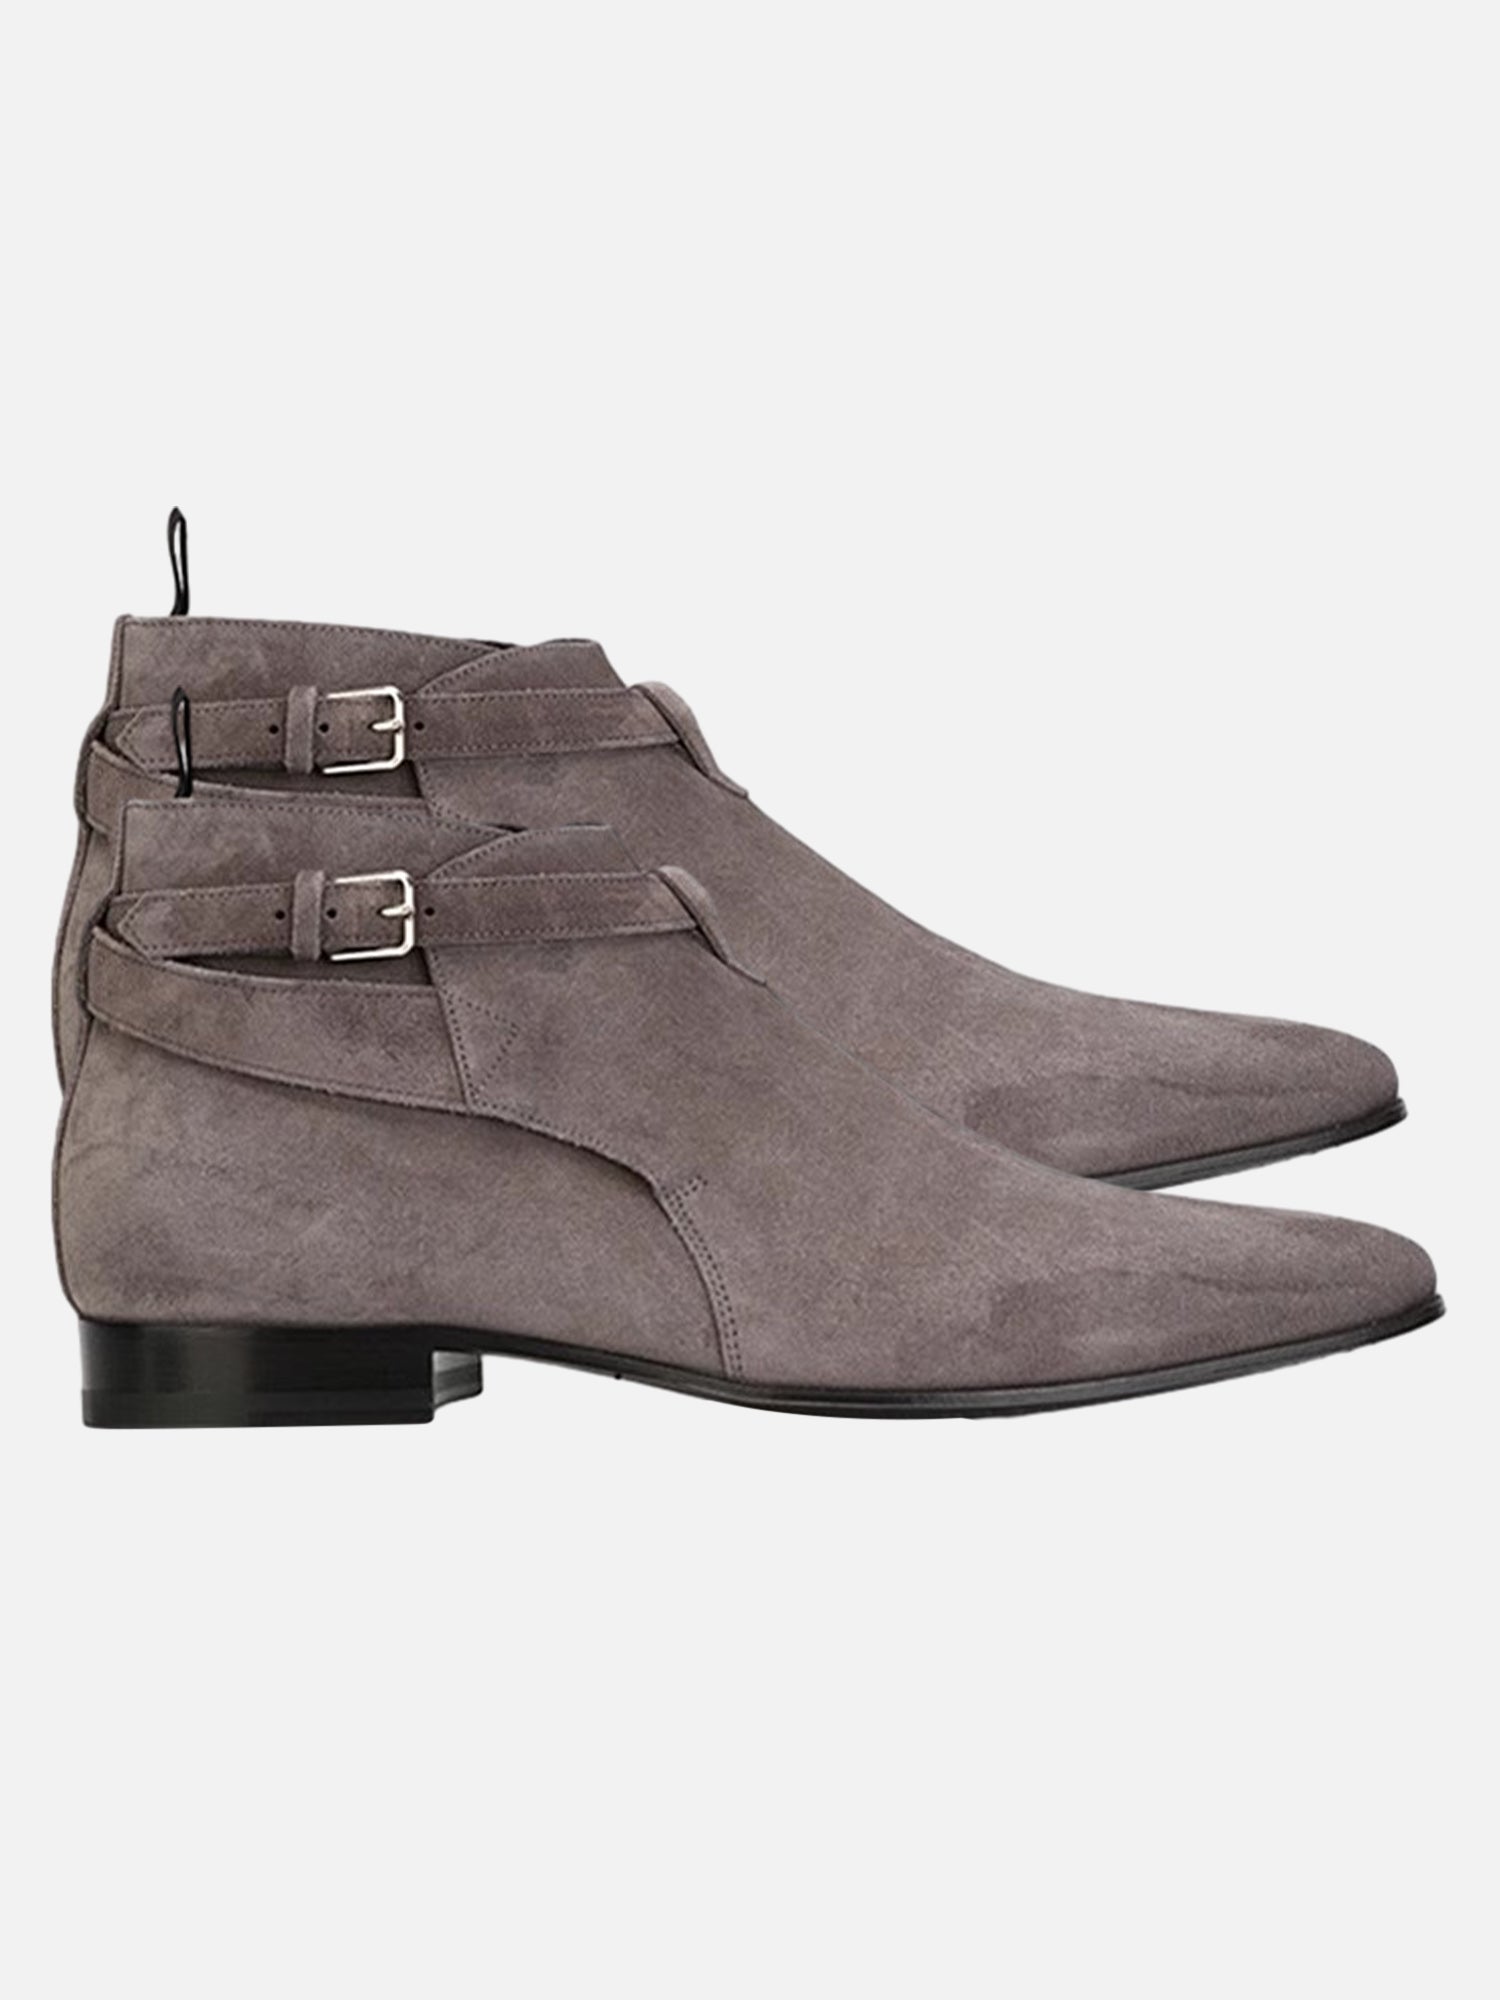 Pointed Toe British Style Buckled Chelsea Boots